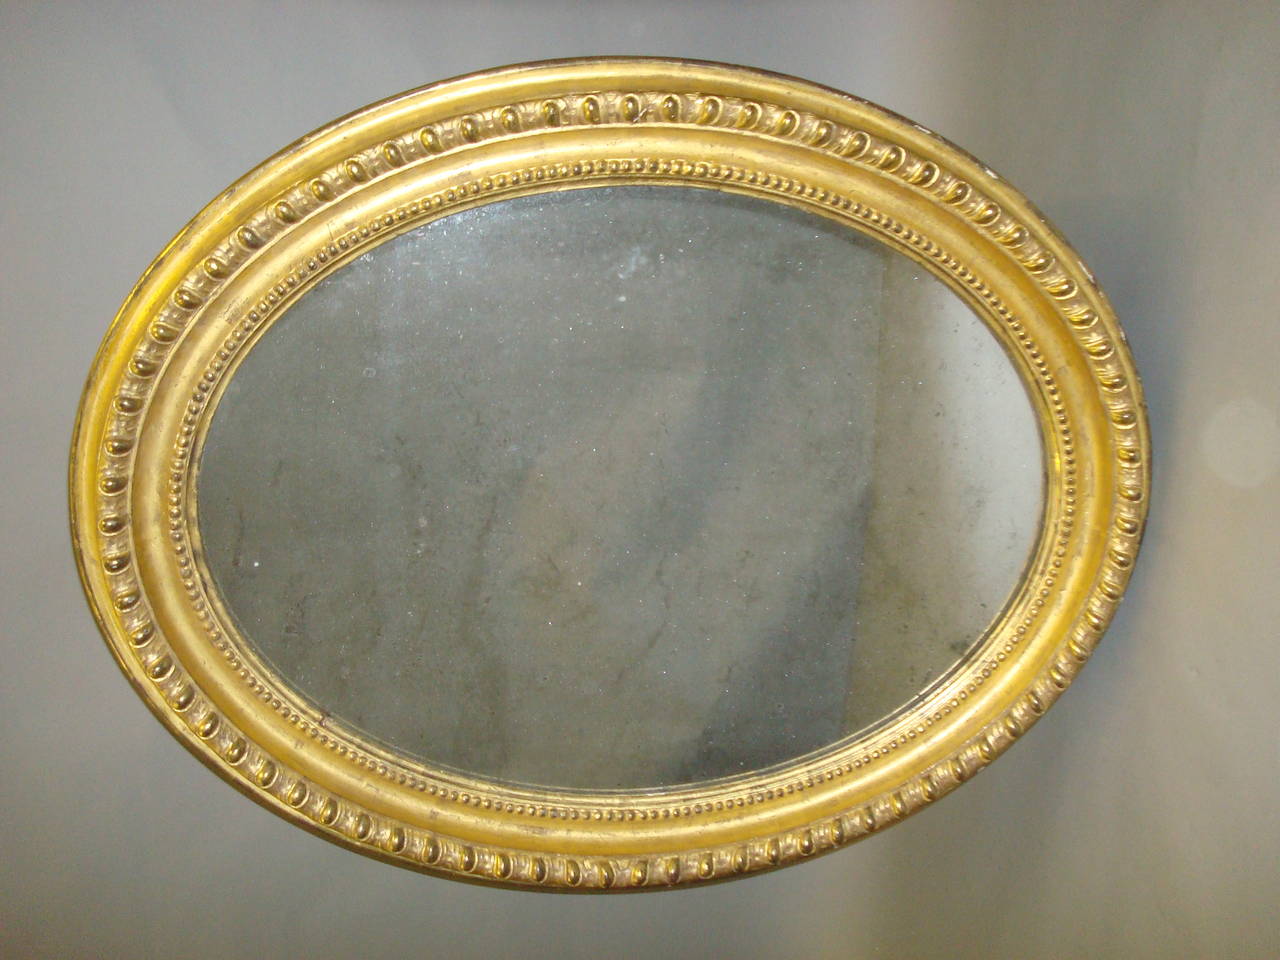 Early 19th Century Giltwood Oval Wall Mirror In Excellent Condition For Sale In Moreton-in-Marsh, Gloucestershire